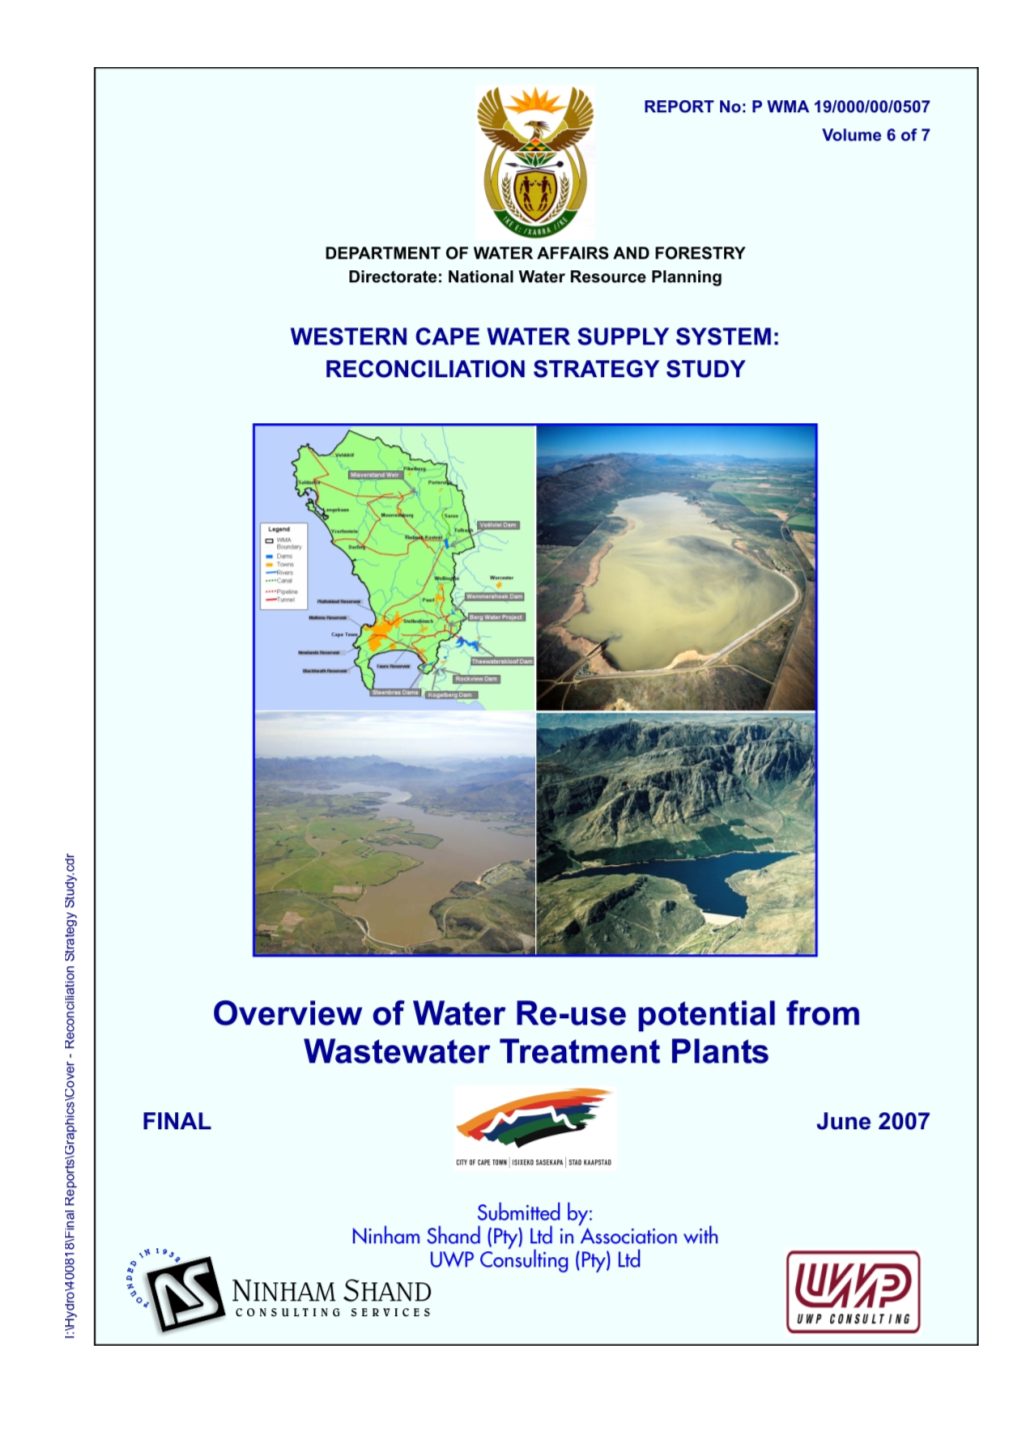 Overview of Water Re-Use Potential from Wastewater Treatment Plants